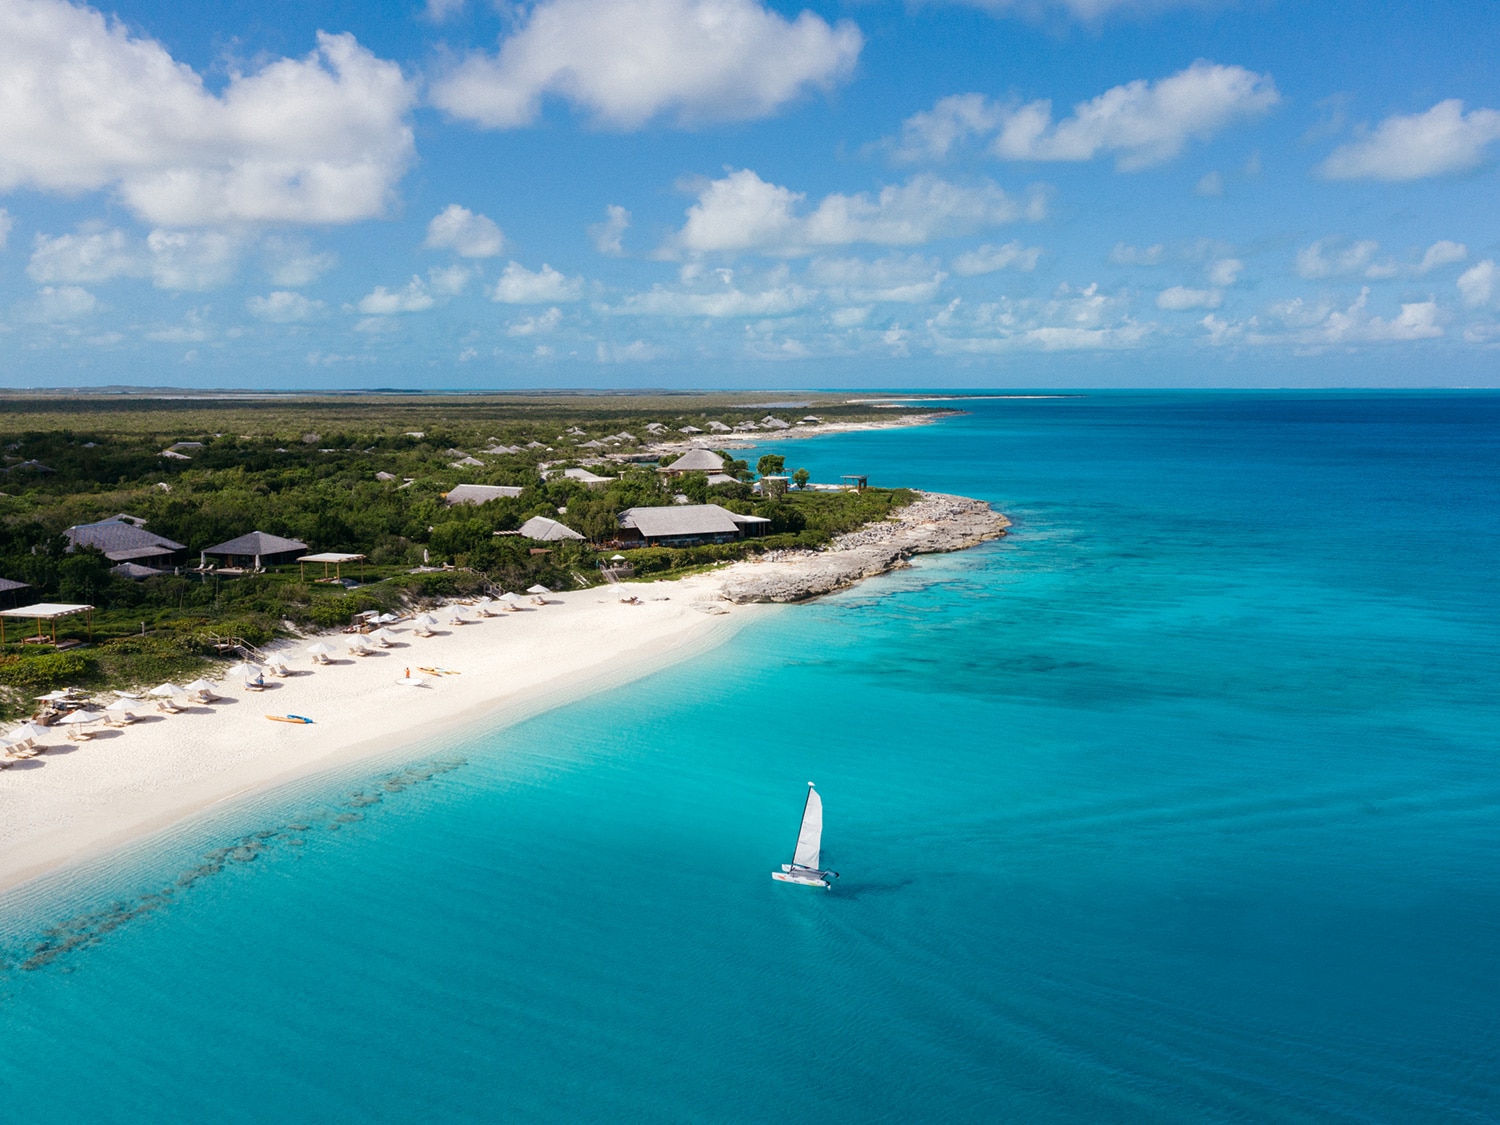 An aerial view of the beach and property at Amanyara in Turks and Caicos.